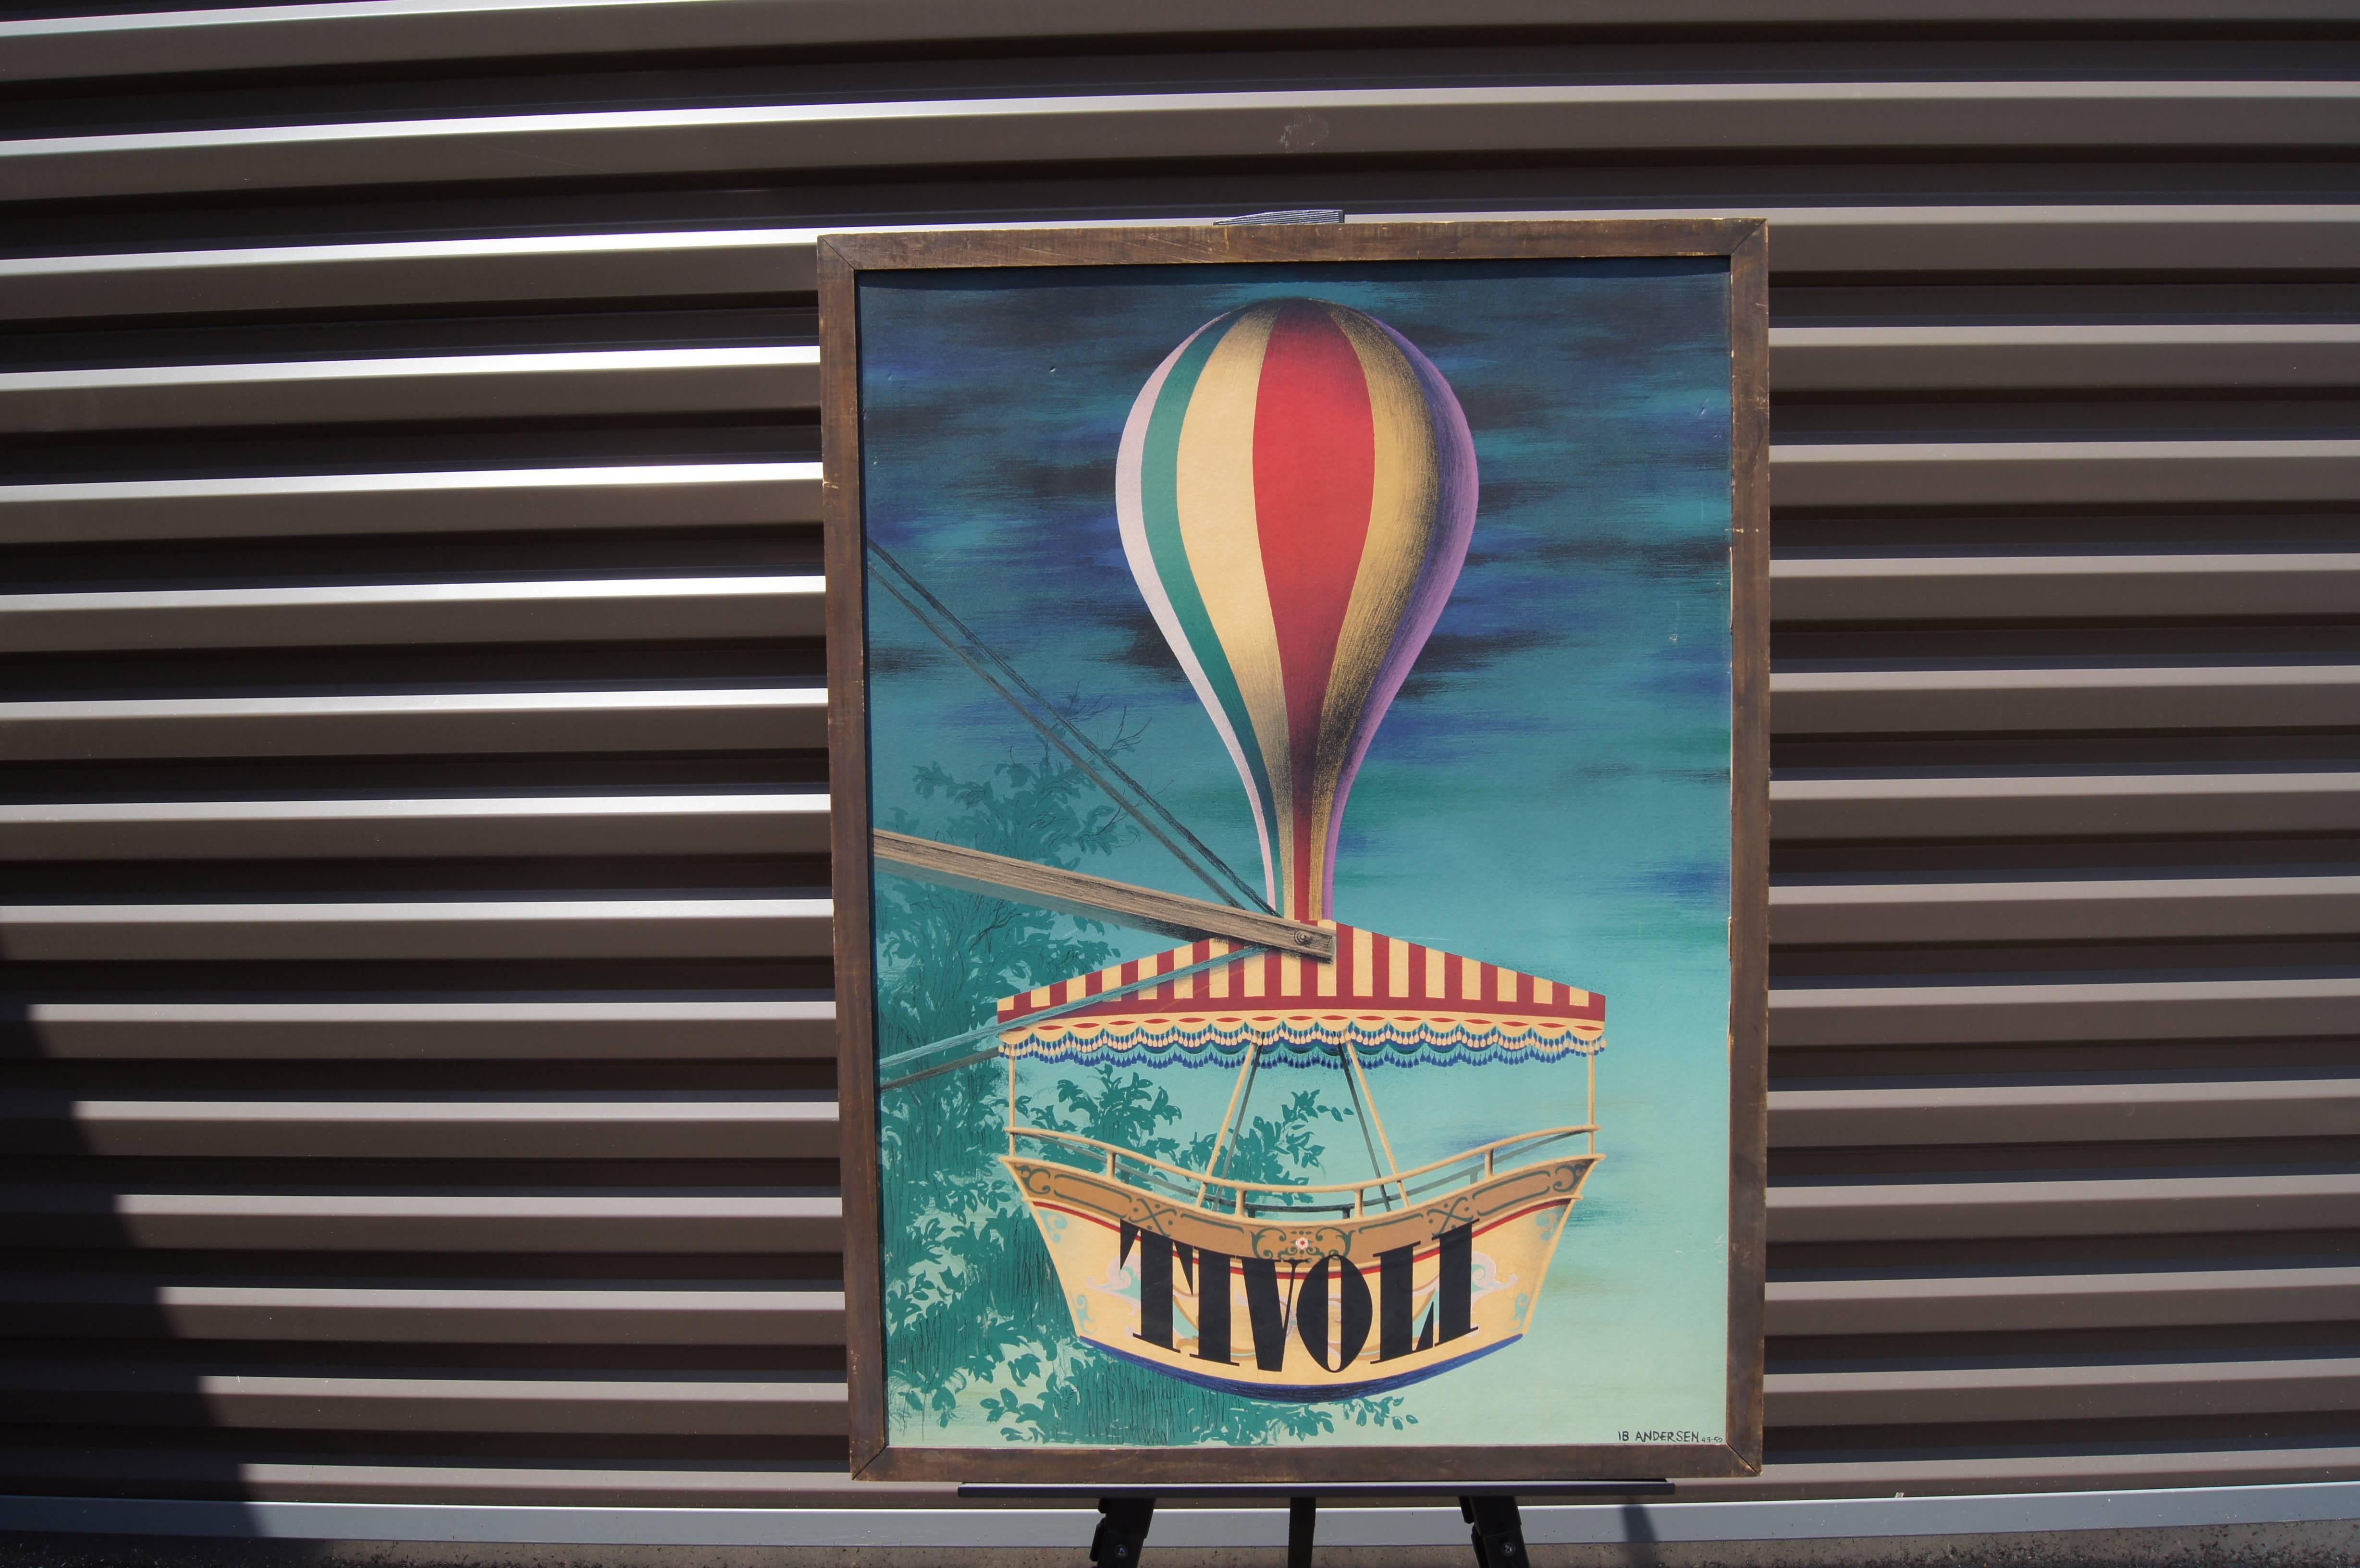 Designed in 1943 by Ib Andersen to advertise the Tivoli Amusement Park in the centre of Copenhagen, this wonderful poster captures the joy of a summer afternoon. It was produced by the Danish company Permild & Rosengreen, renowned for their color